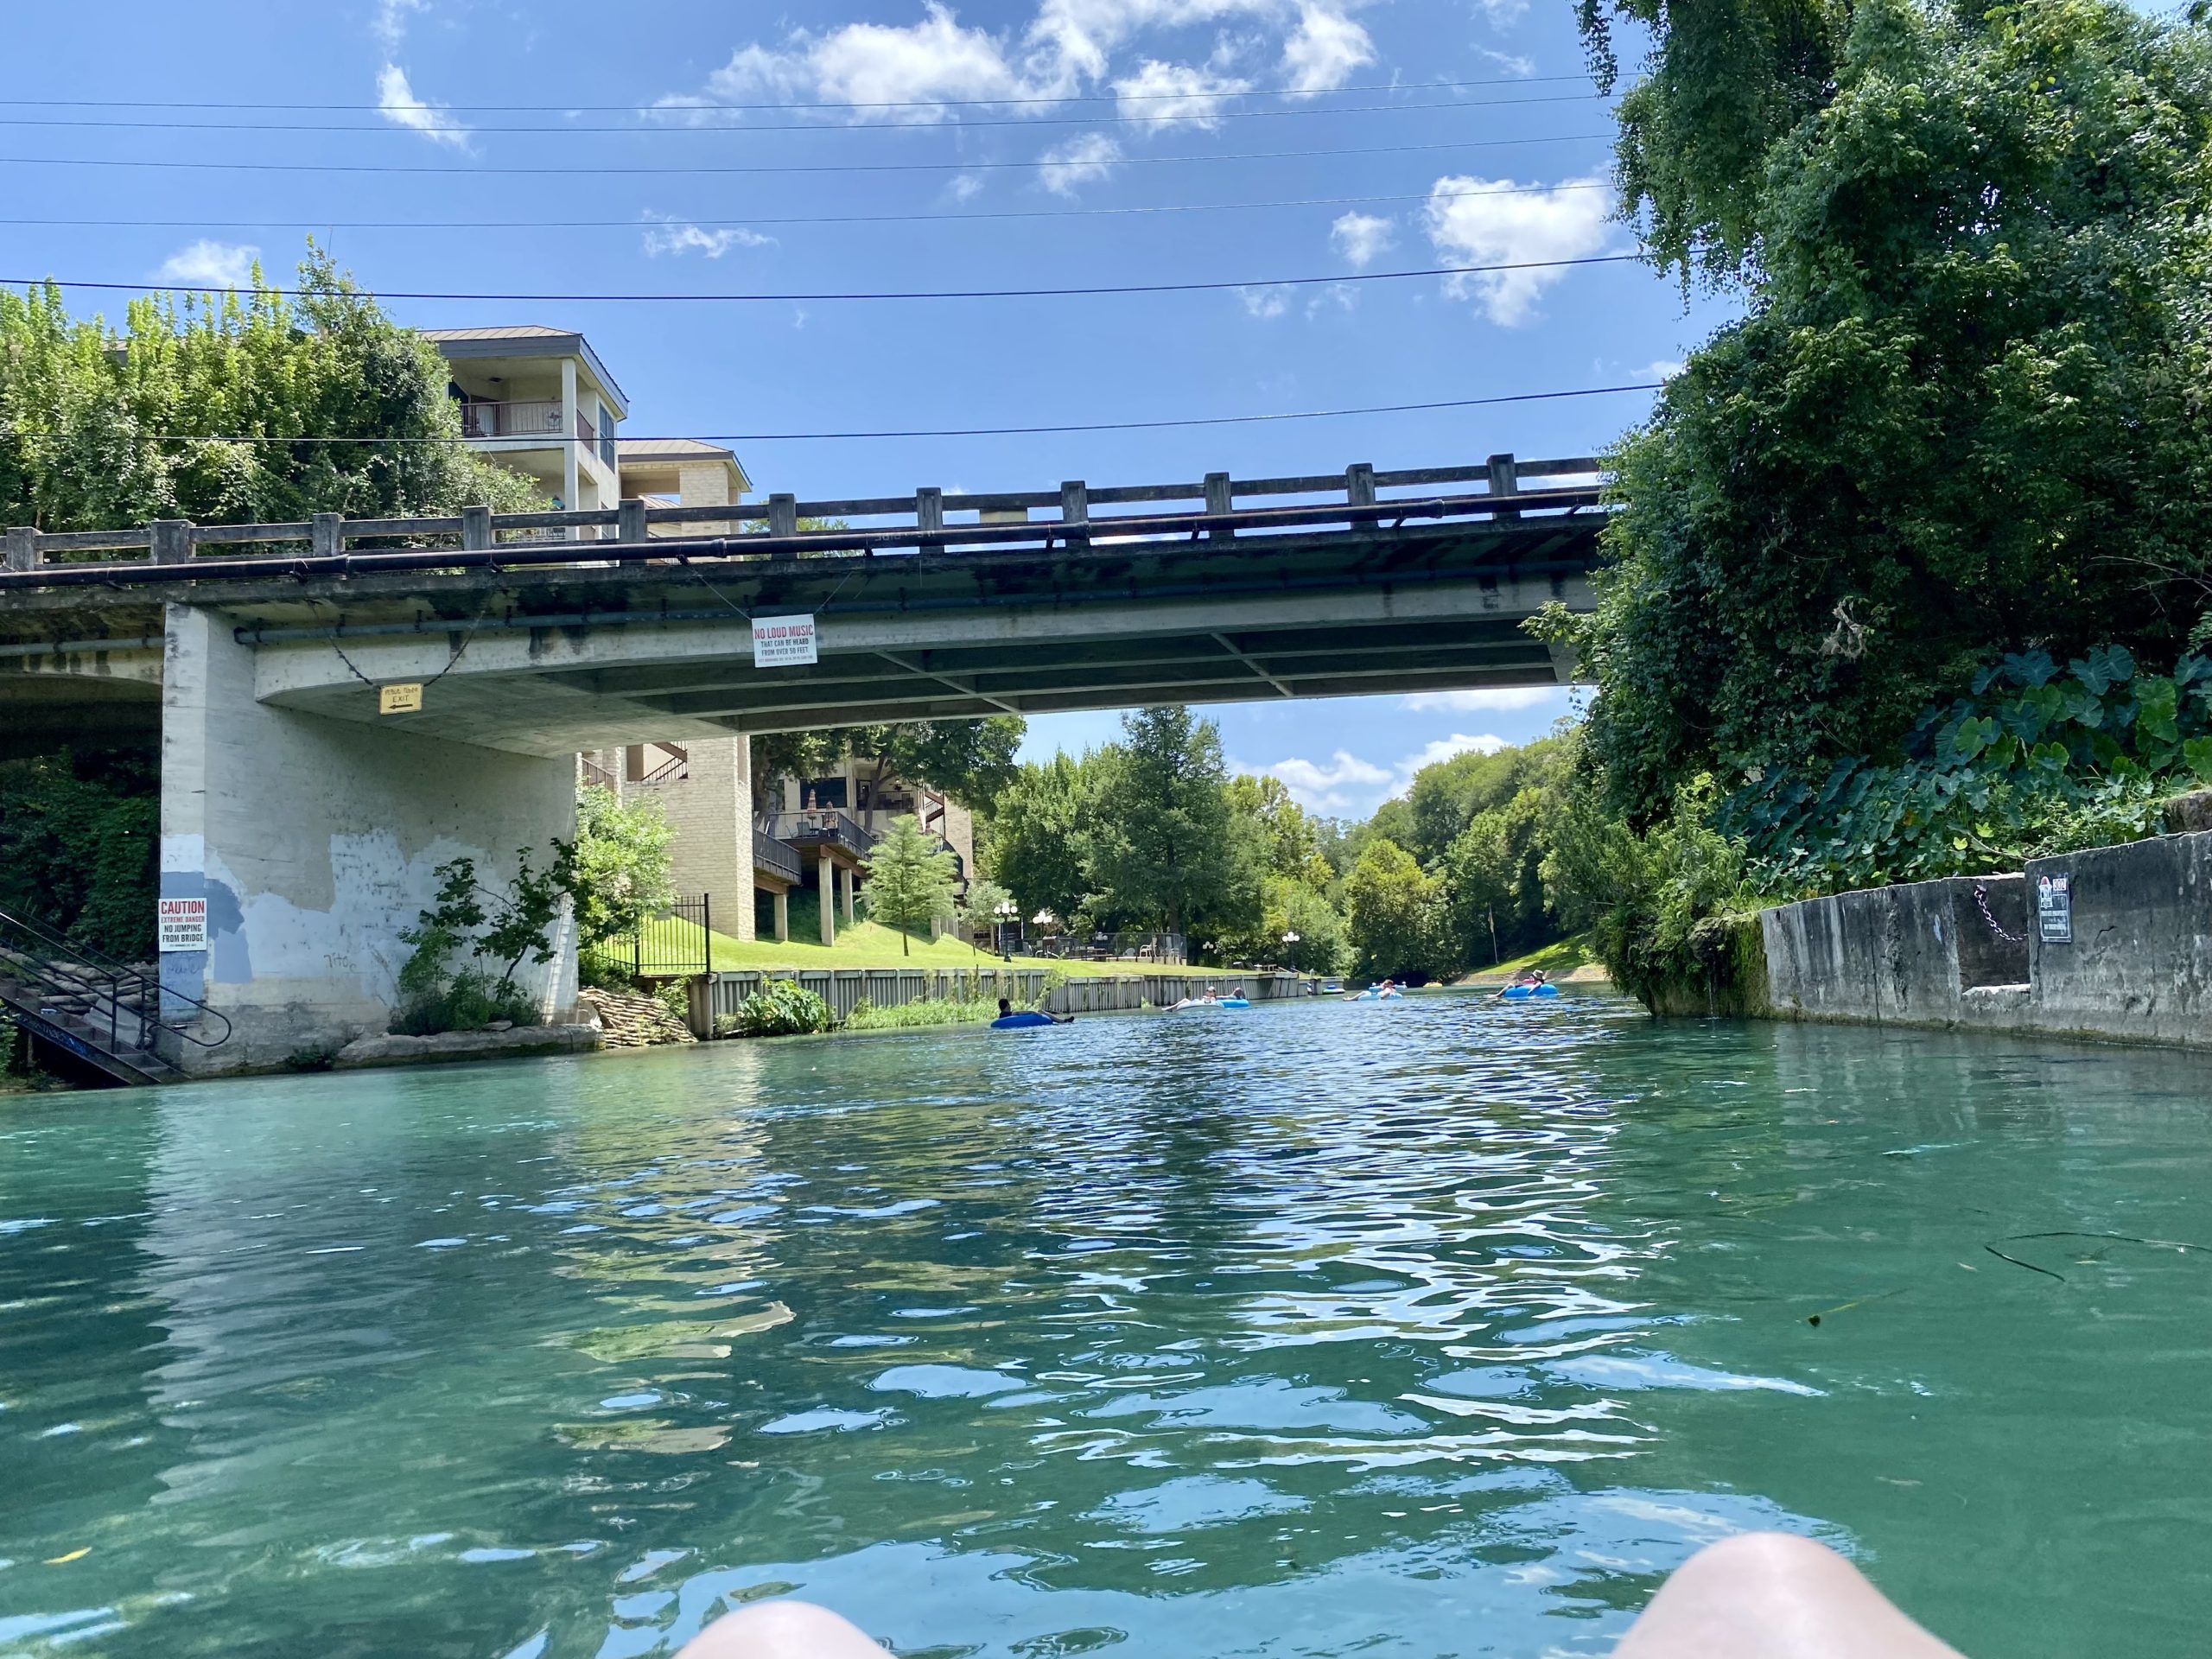 a person's feet on a body of water under a bridge